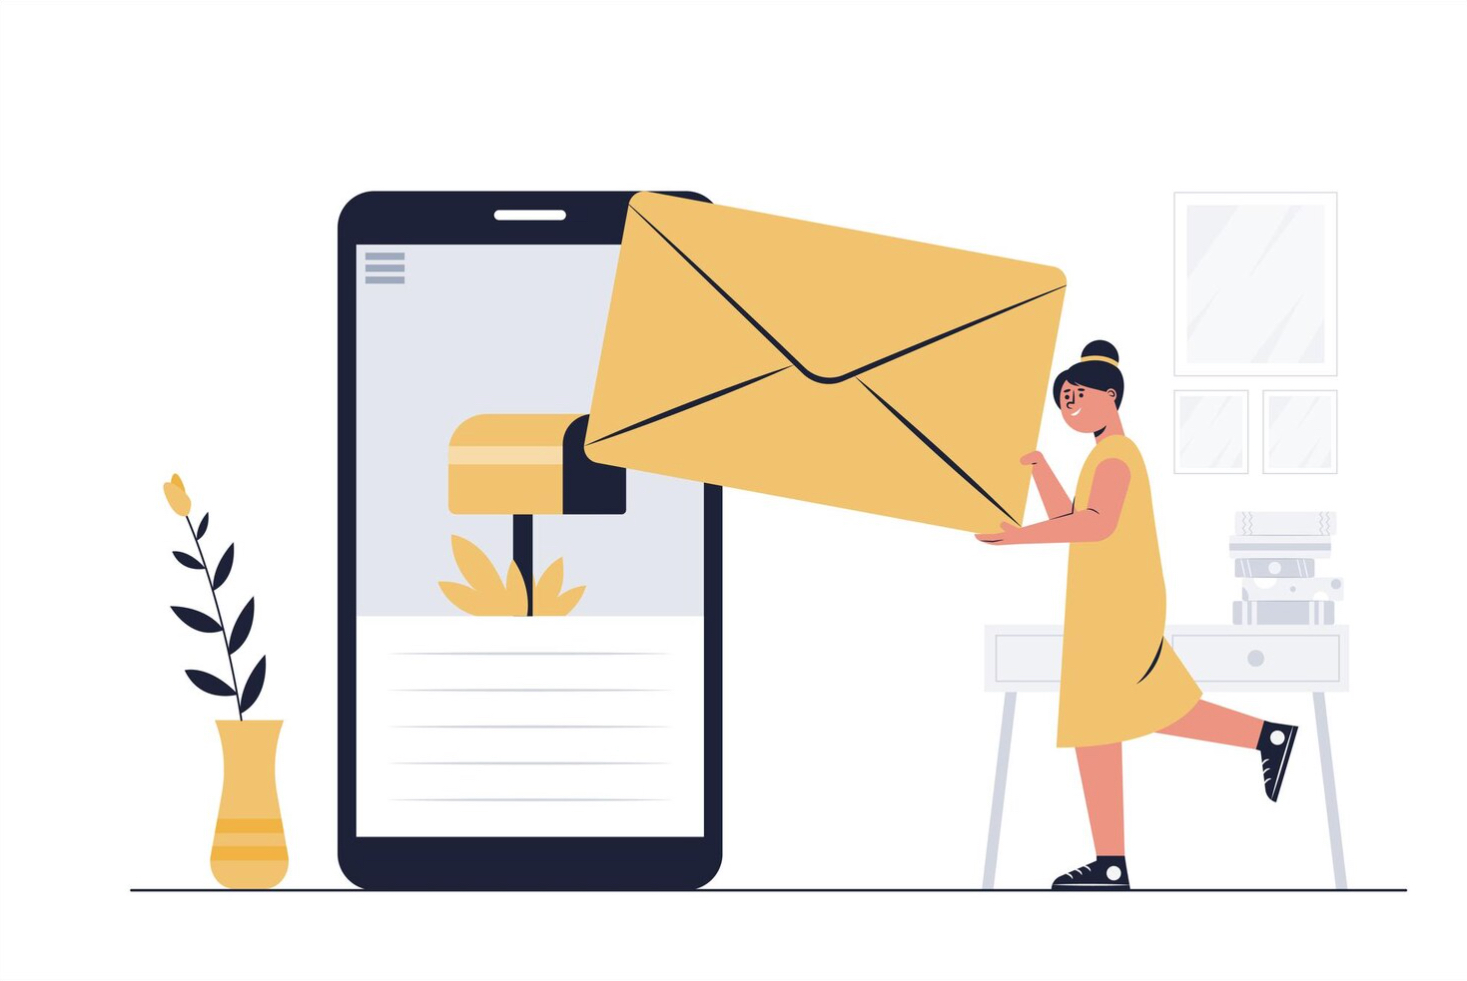 Email Design for Mobile